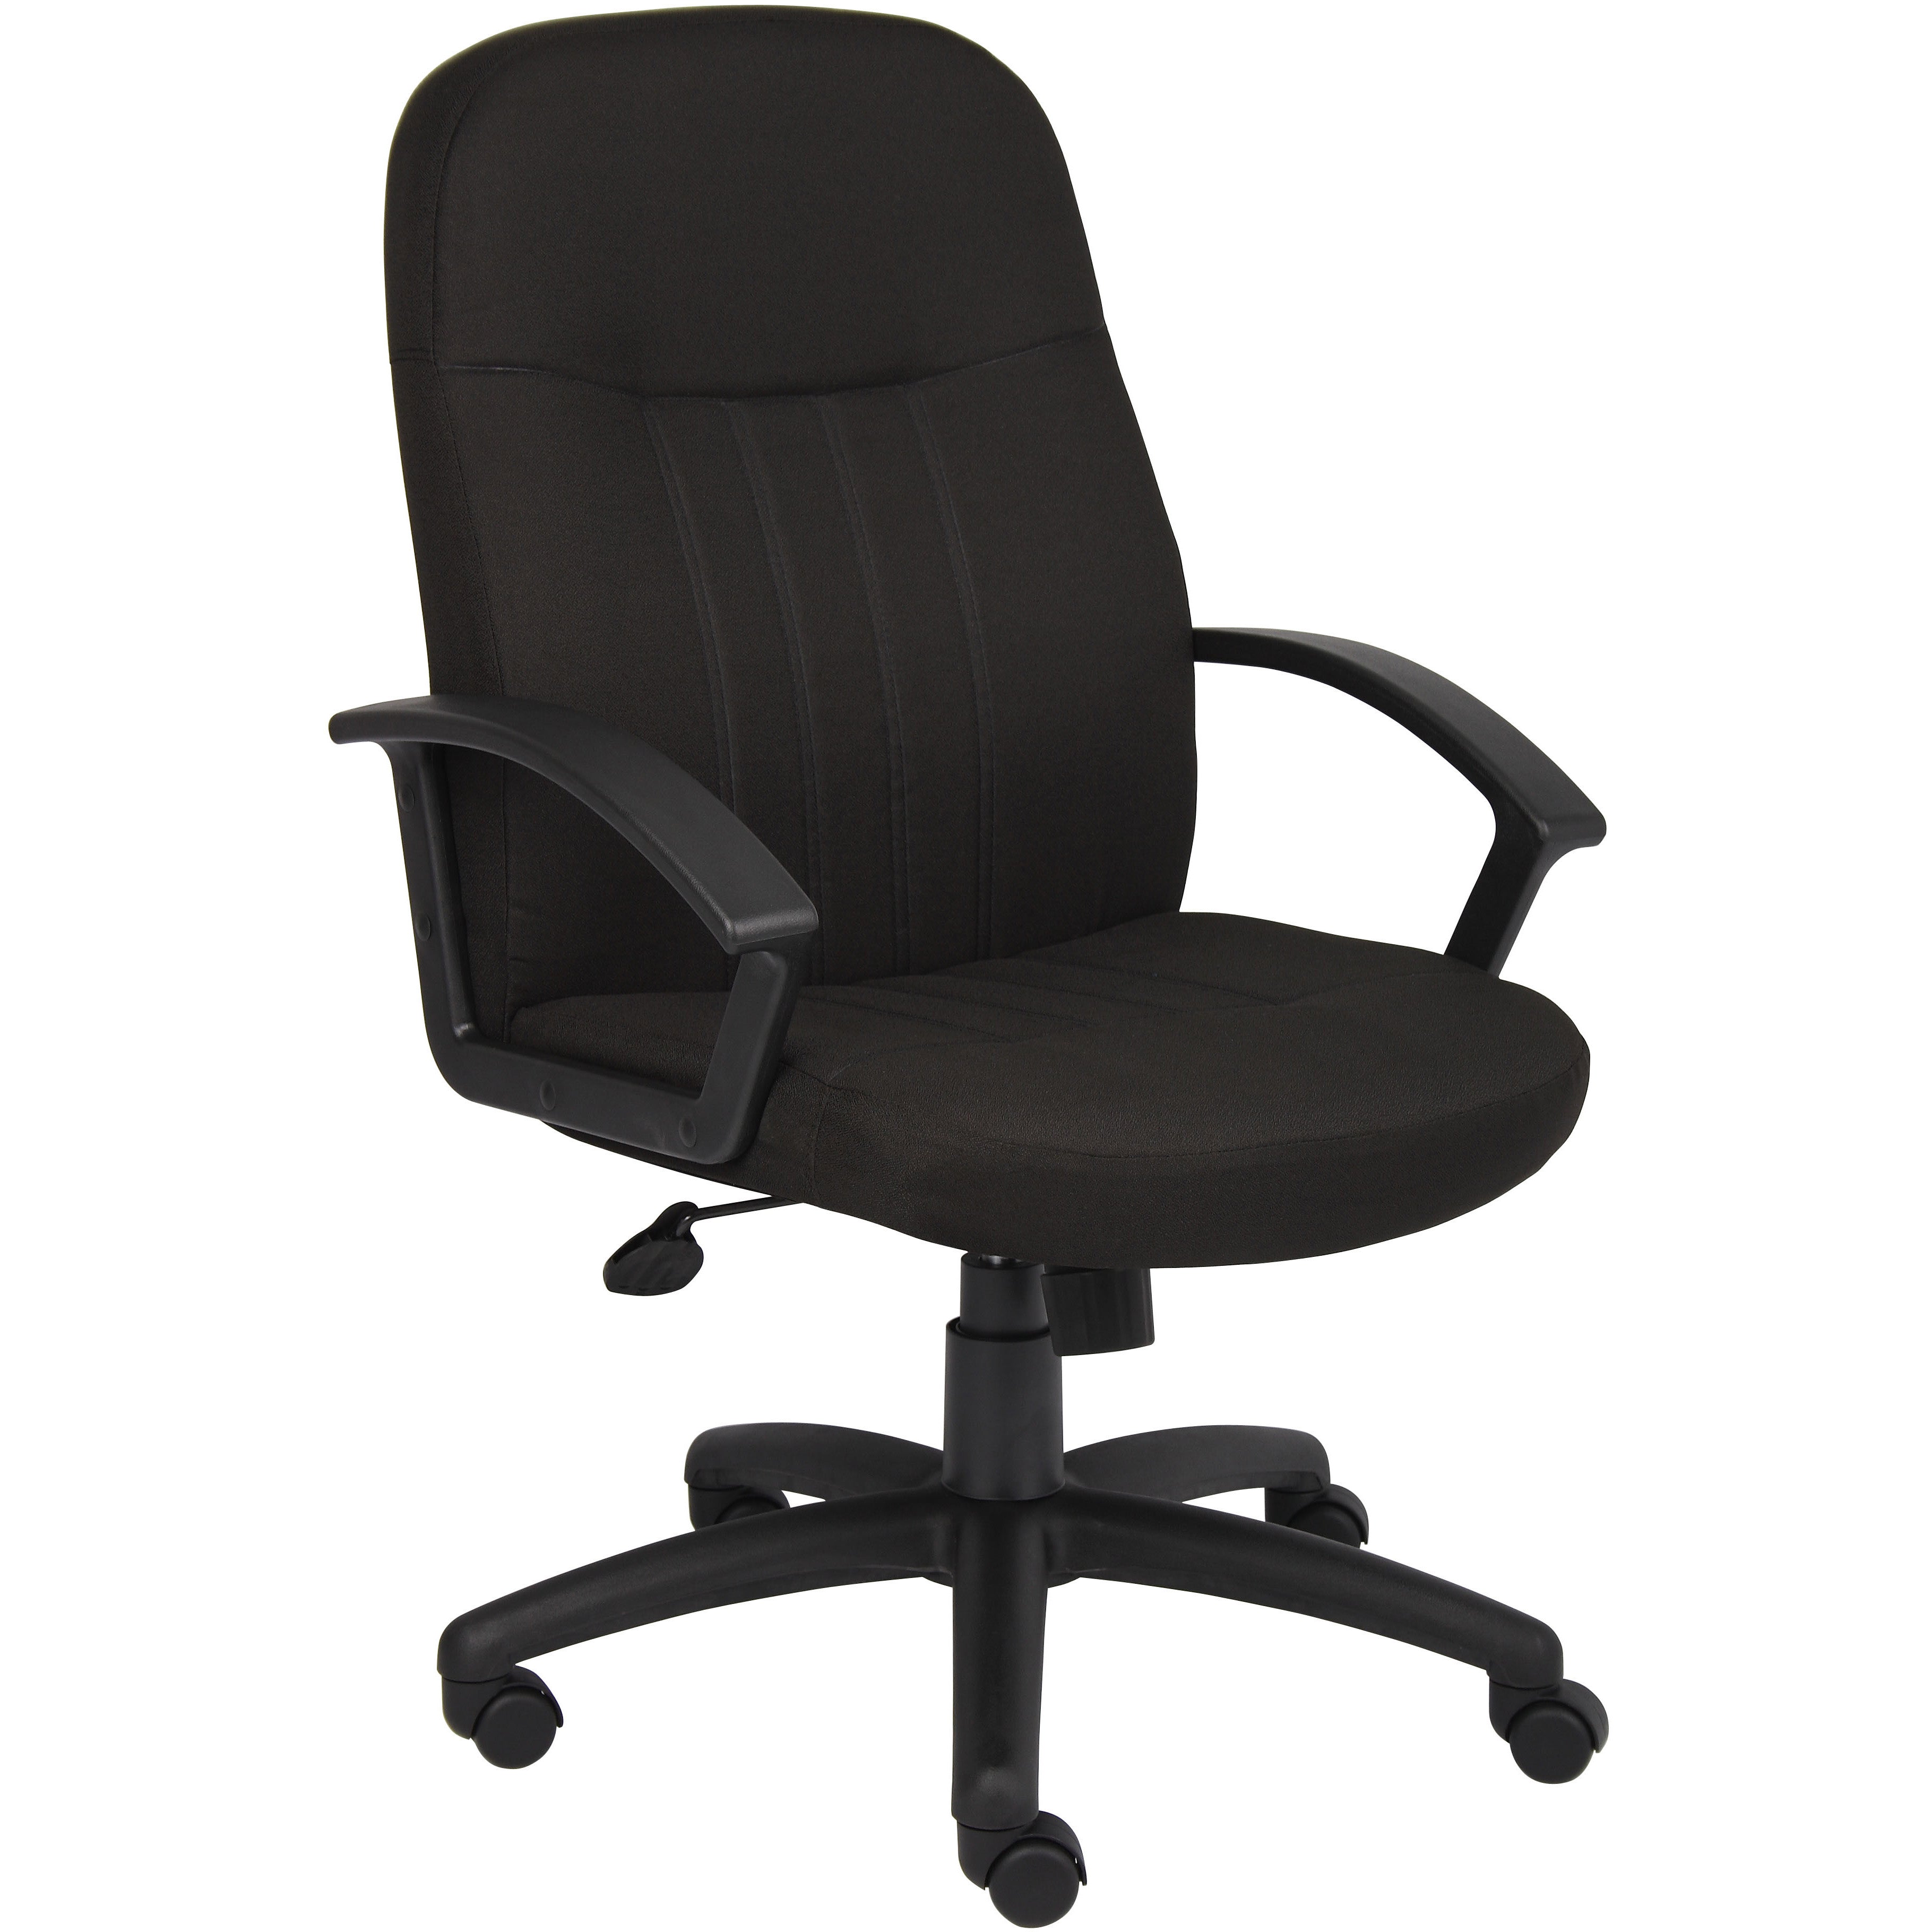 Mid Back Fabric Managers Chair In Black, B8306-BK